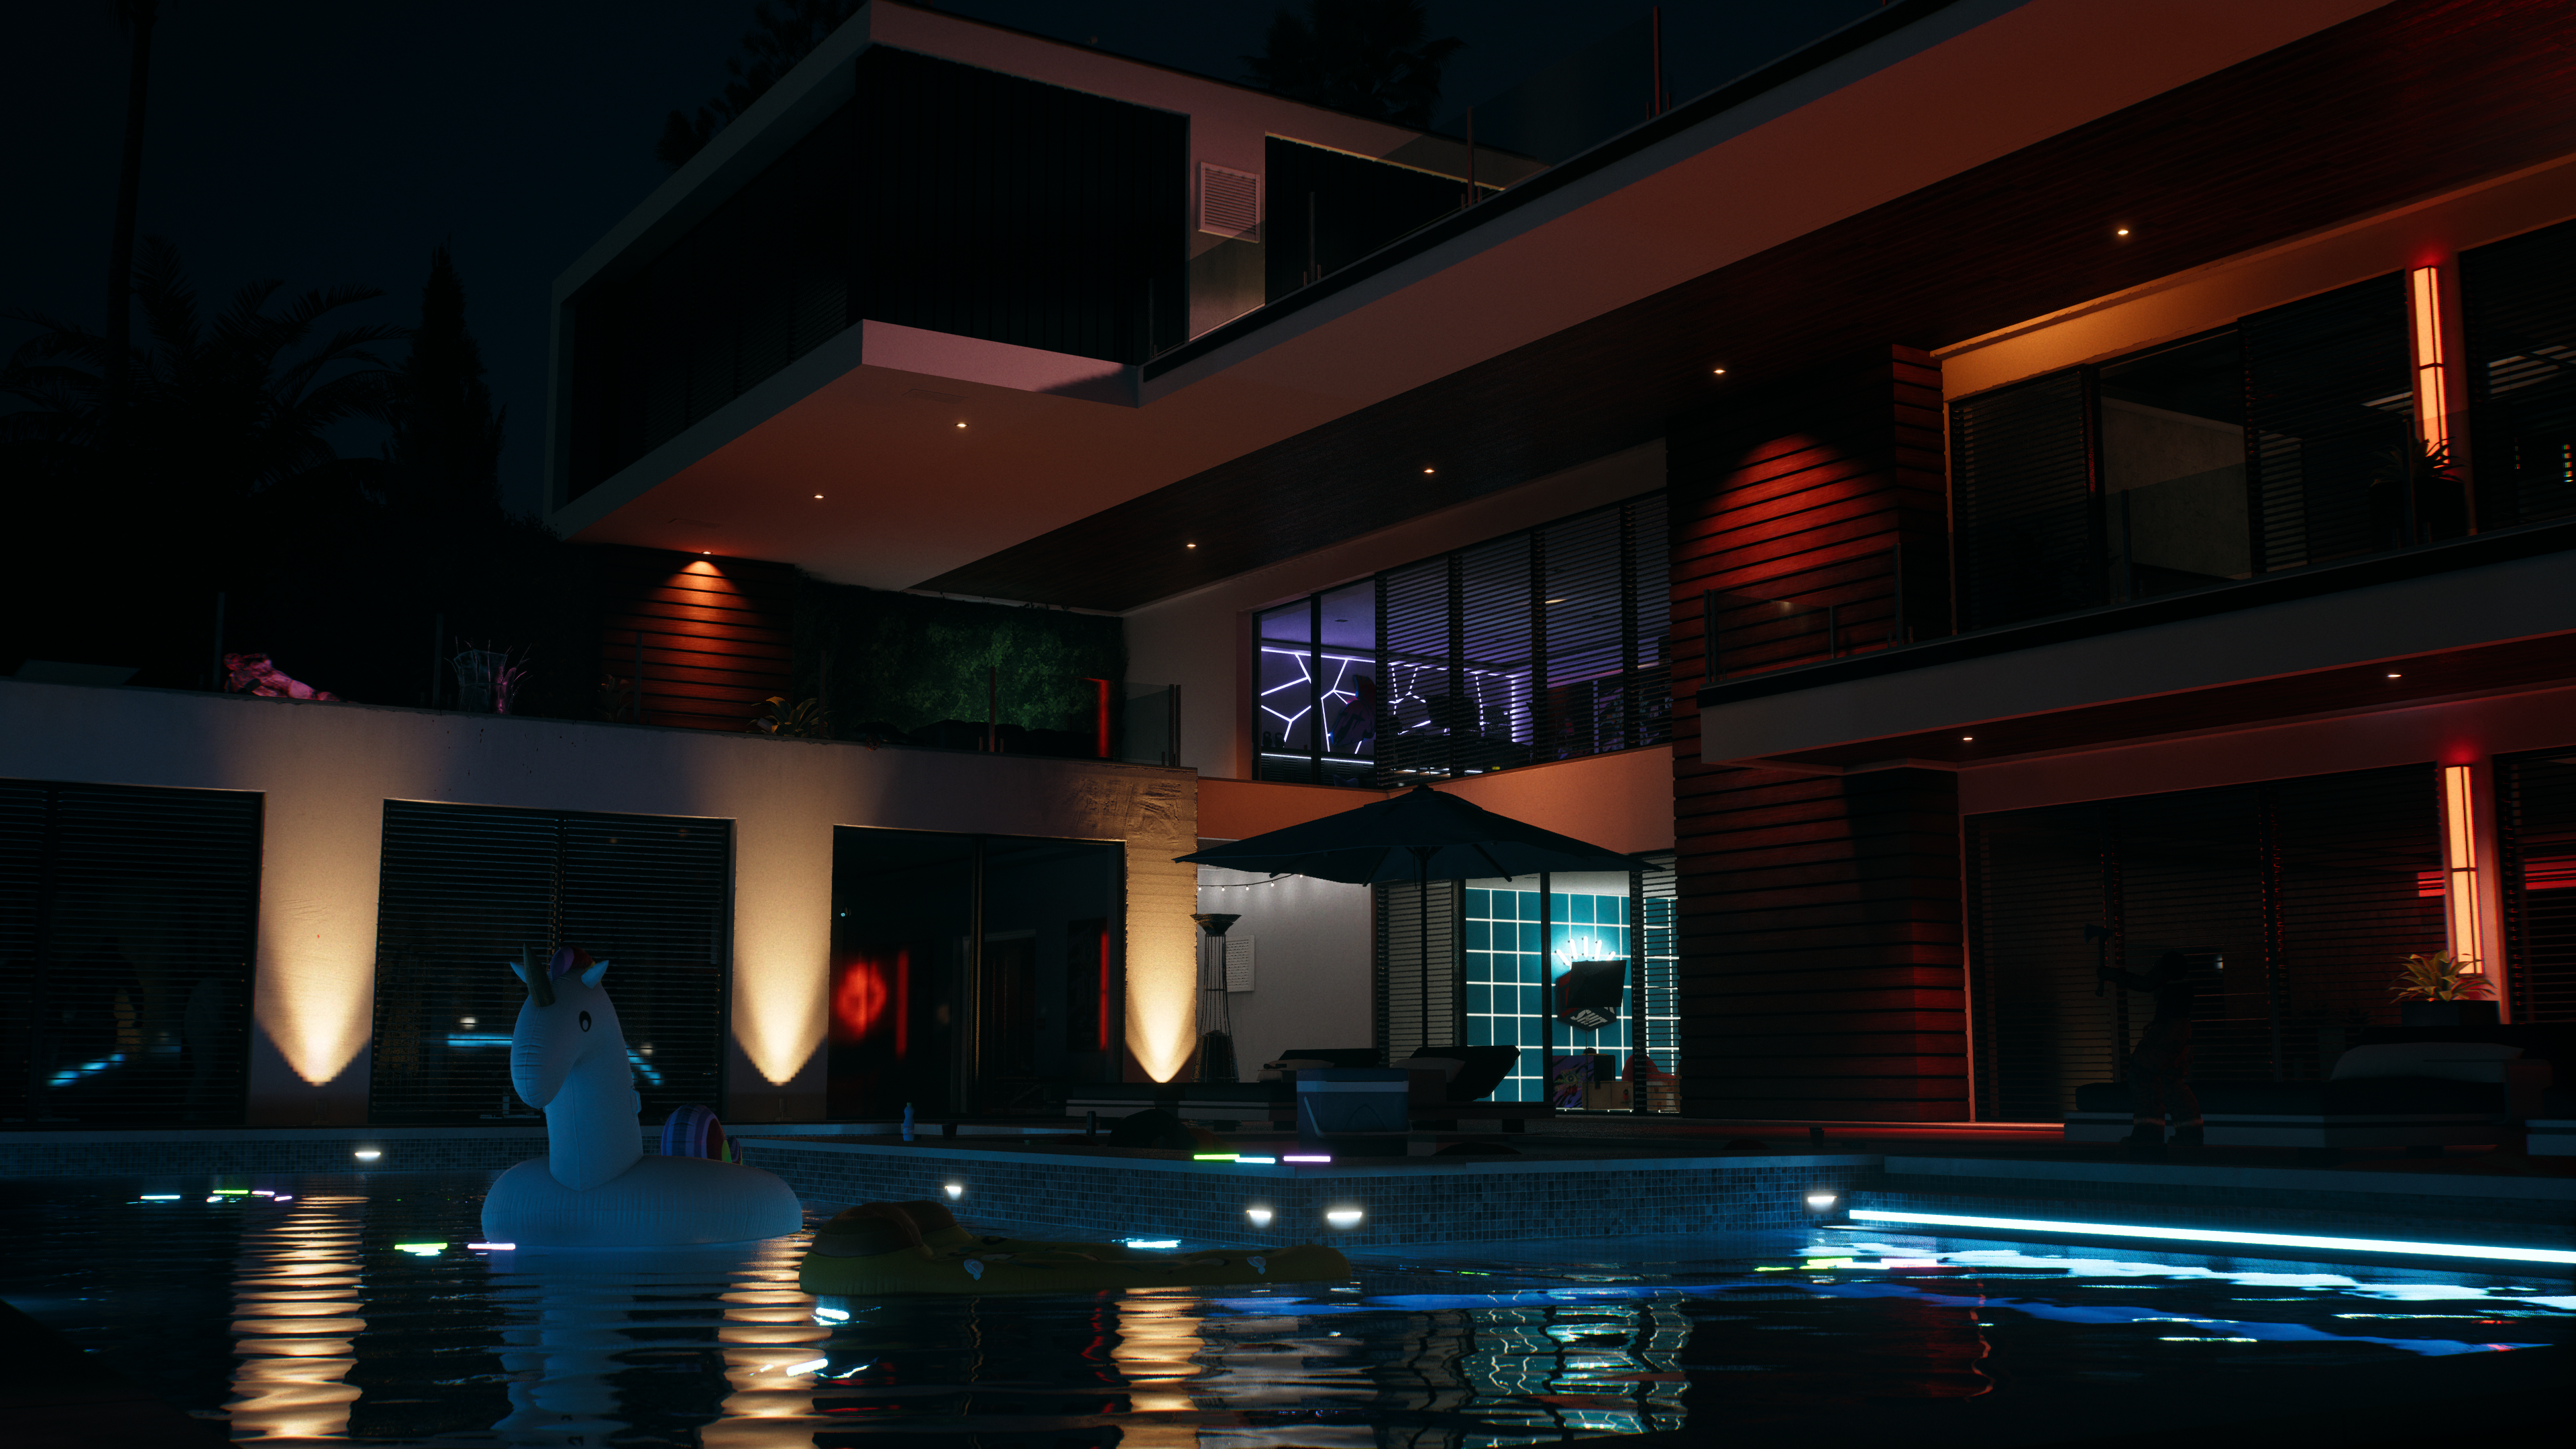 Dead Island 2 Nvidia RTX Video Games CGi Water Swimming Pool Building Night Lights Reflection Floate 3840x2160